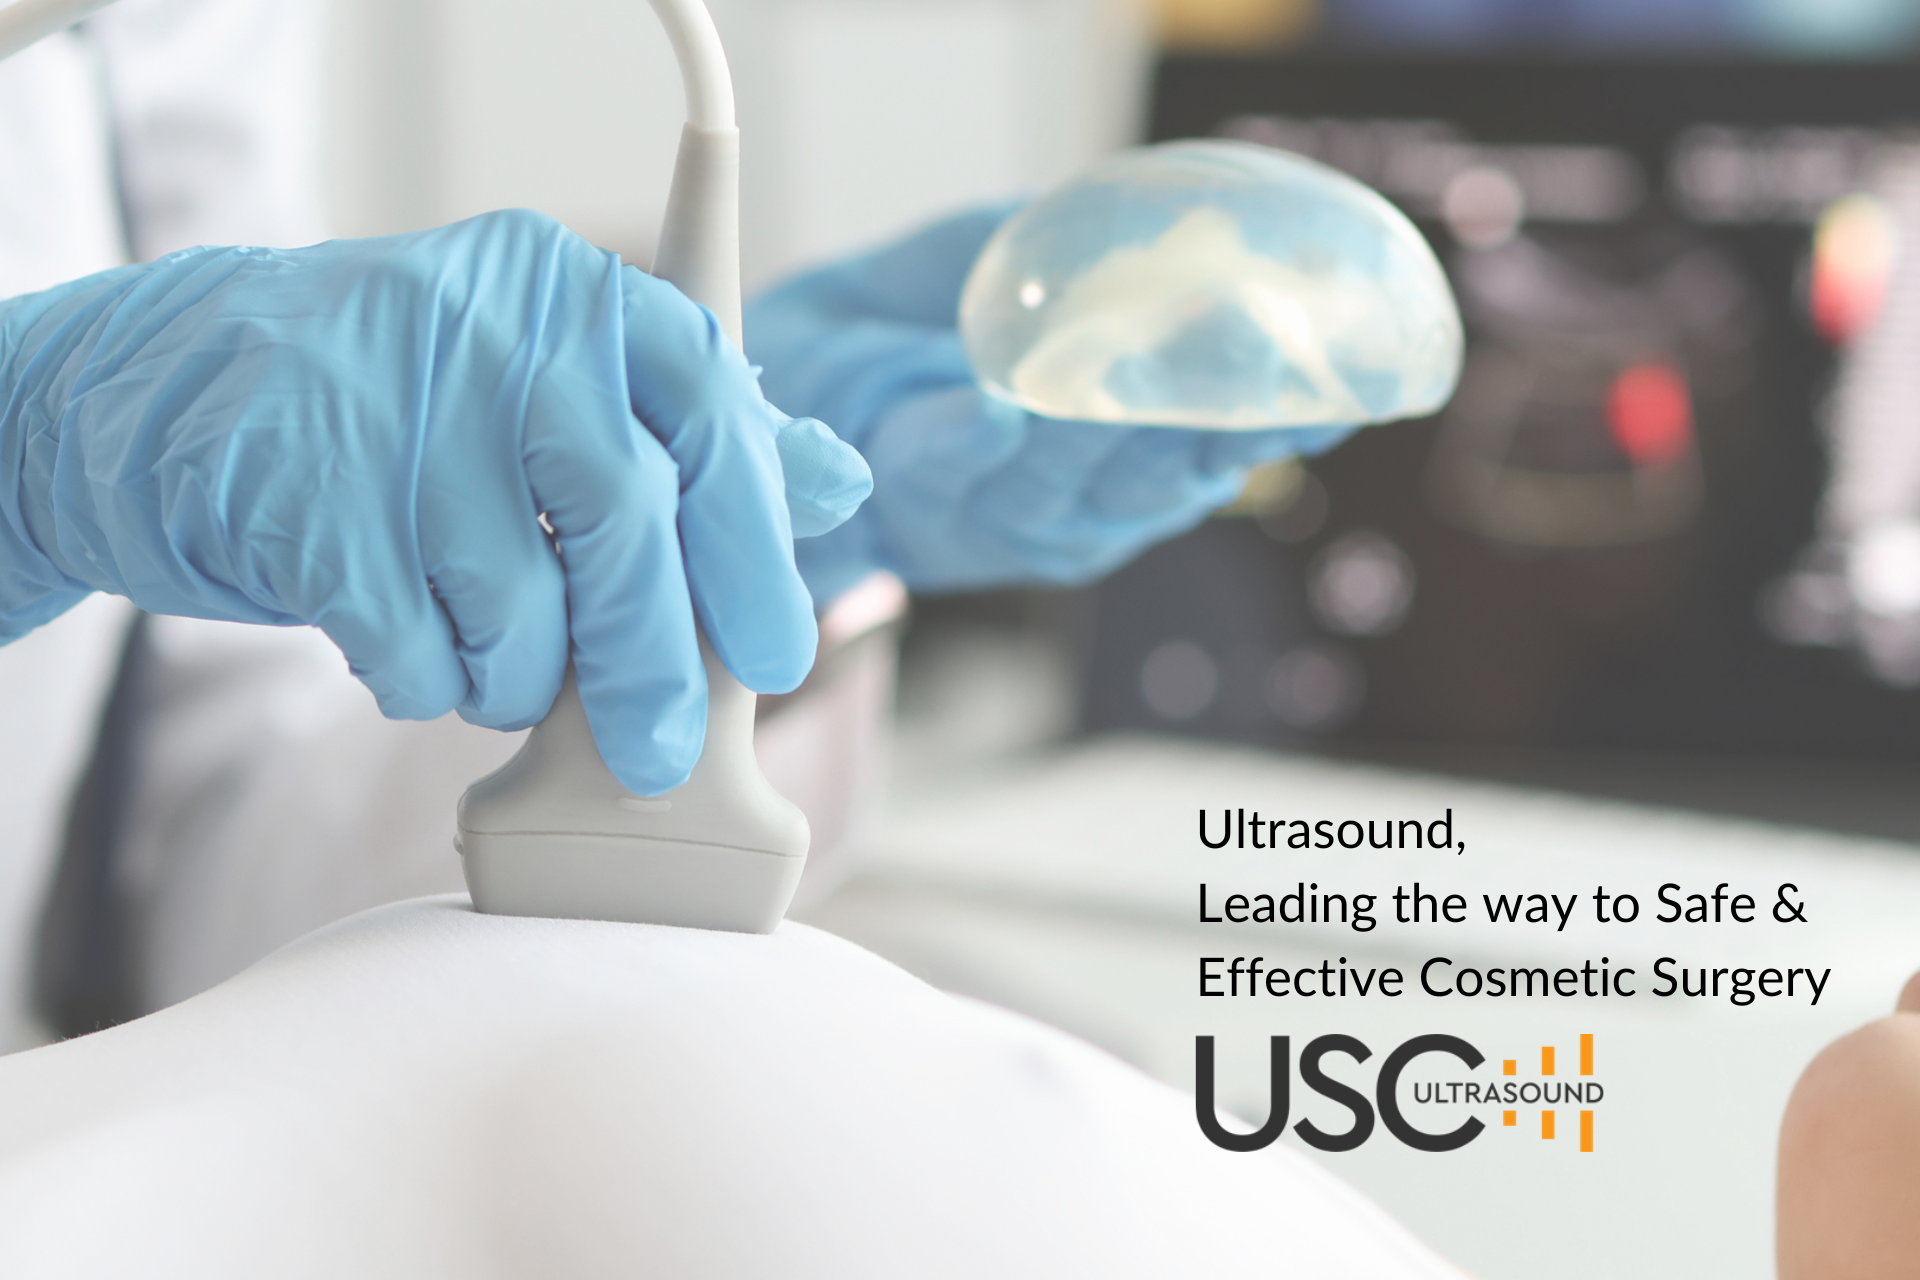 Ultrasound, Leading the way in making Cosmetic Surgery Safer and More Effective